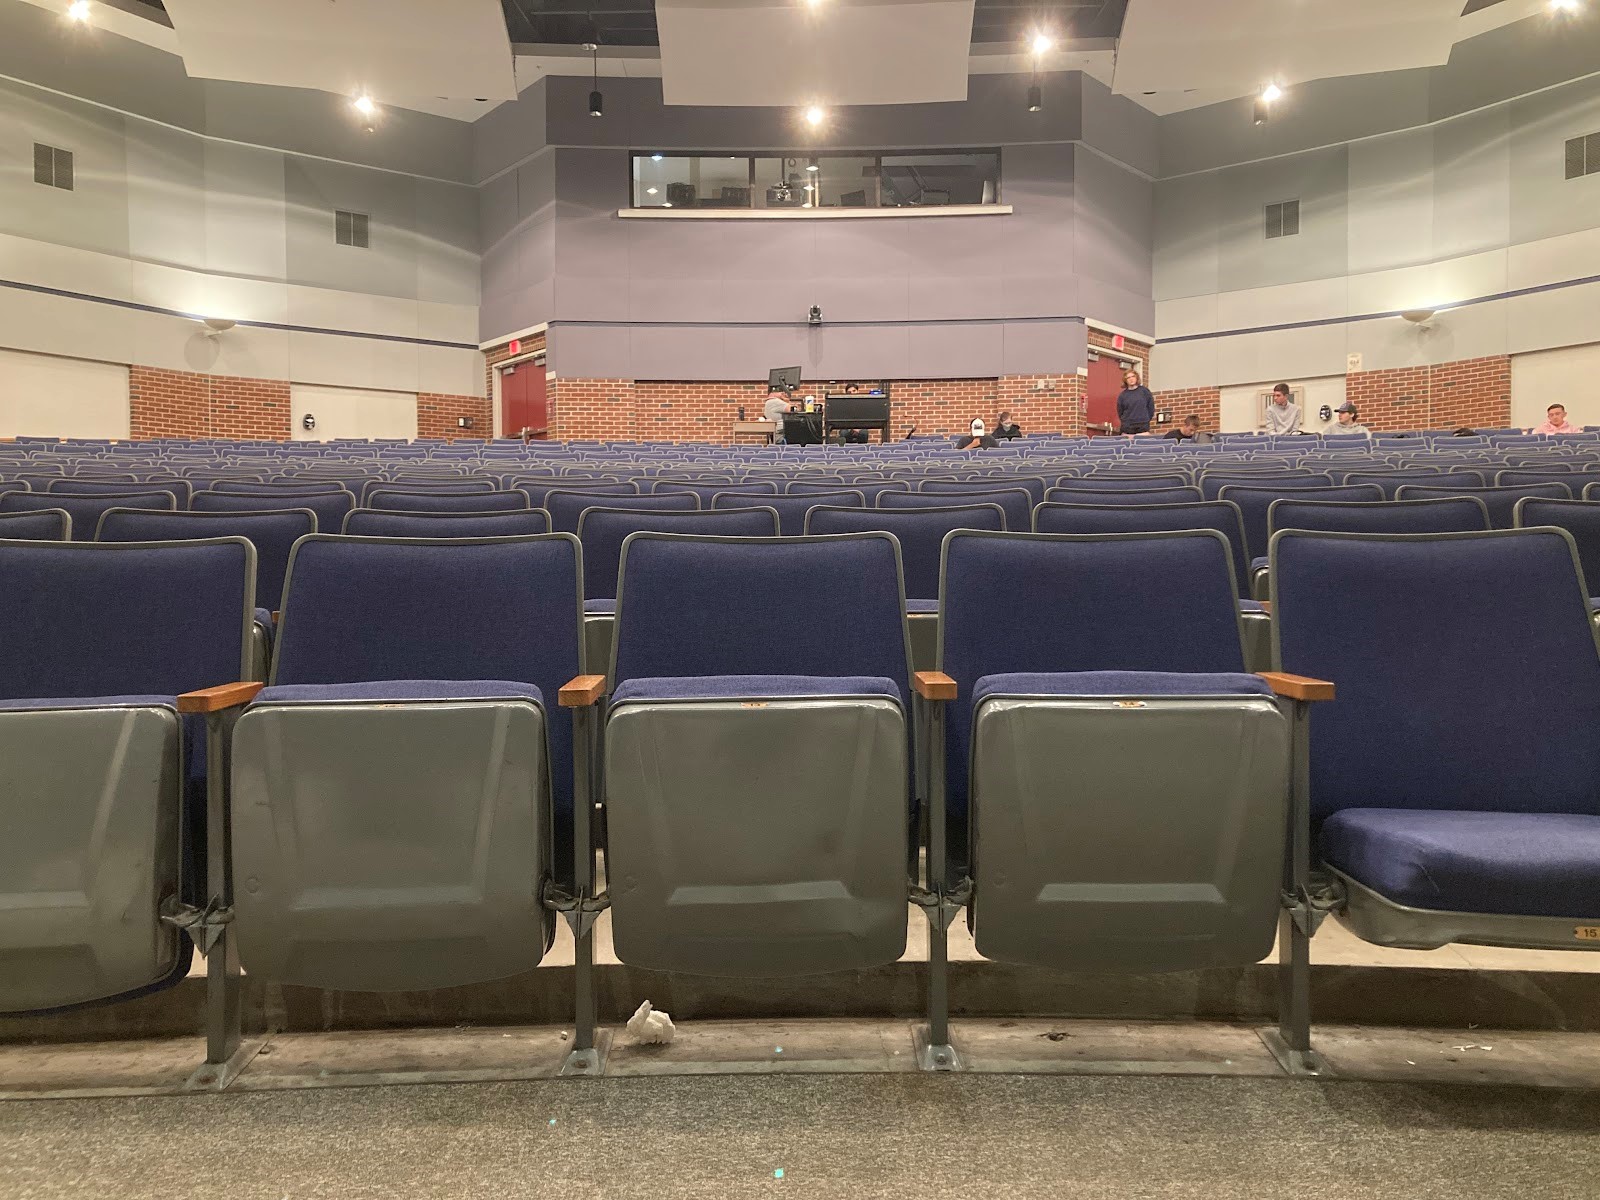 The auditorium at SWHS awaits an audience to witness the talents of the music department.